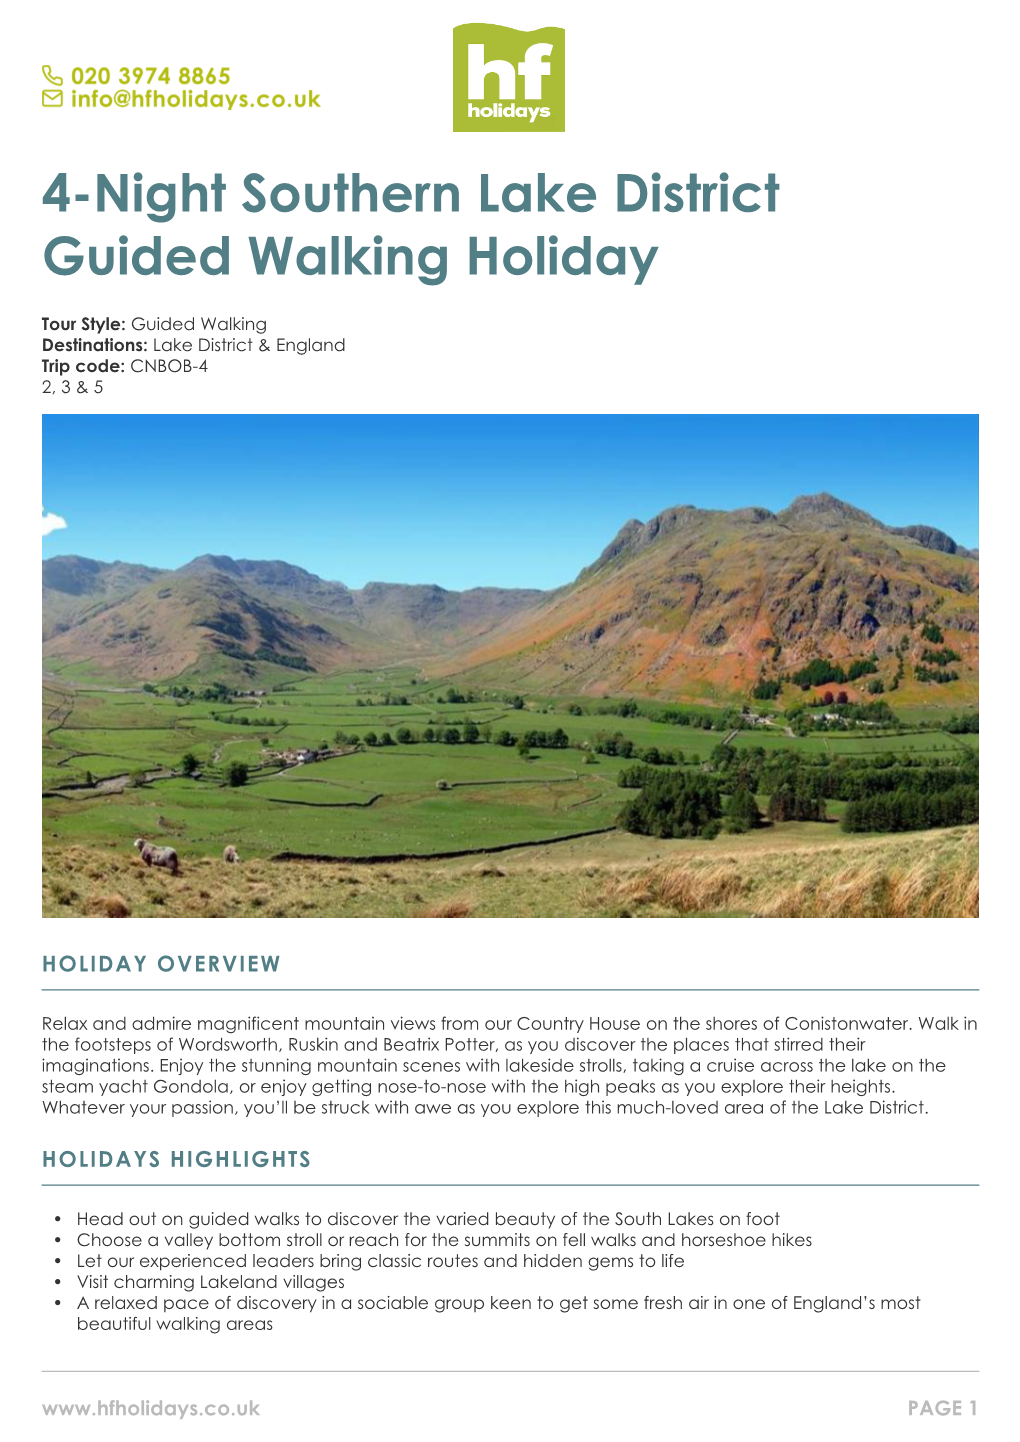 4-Night Southern Lake District Guided Walking Holiday